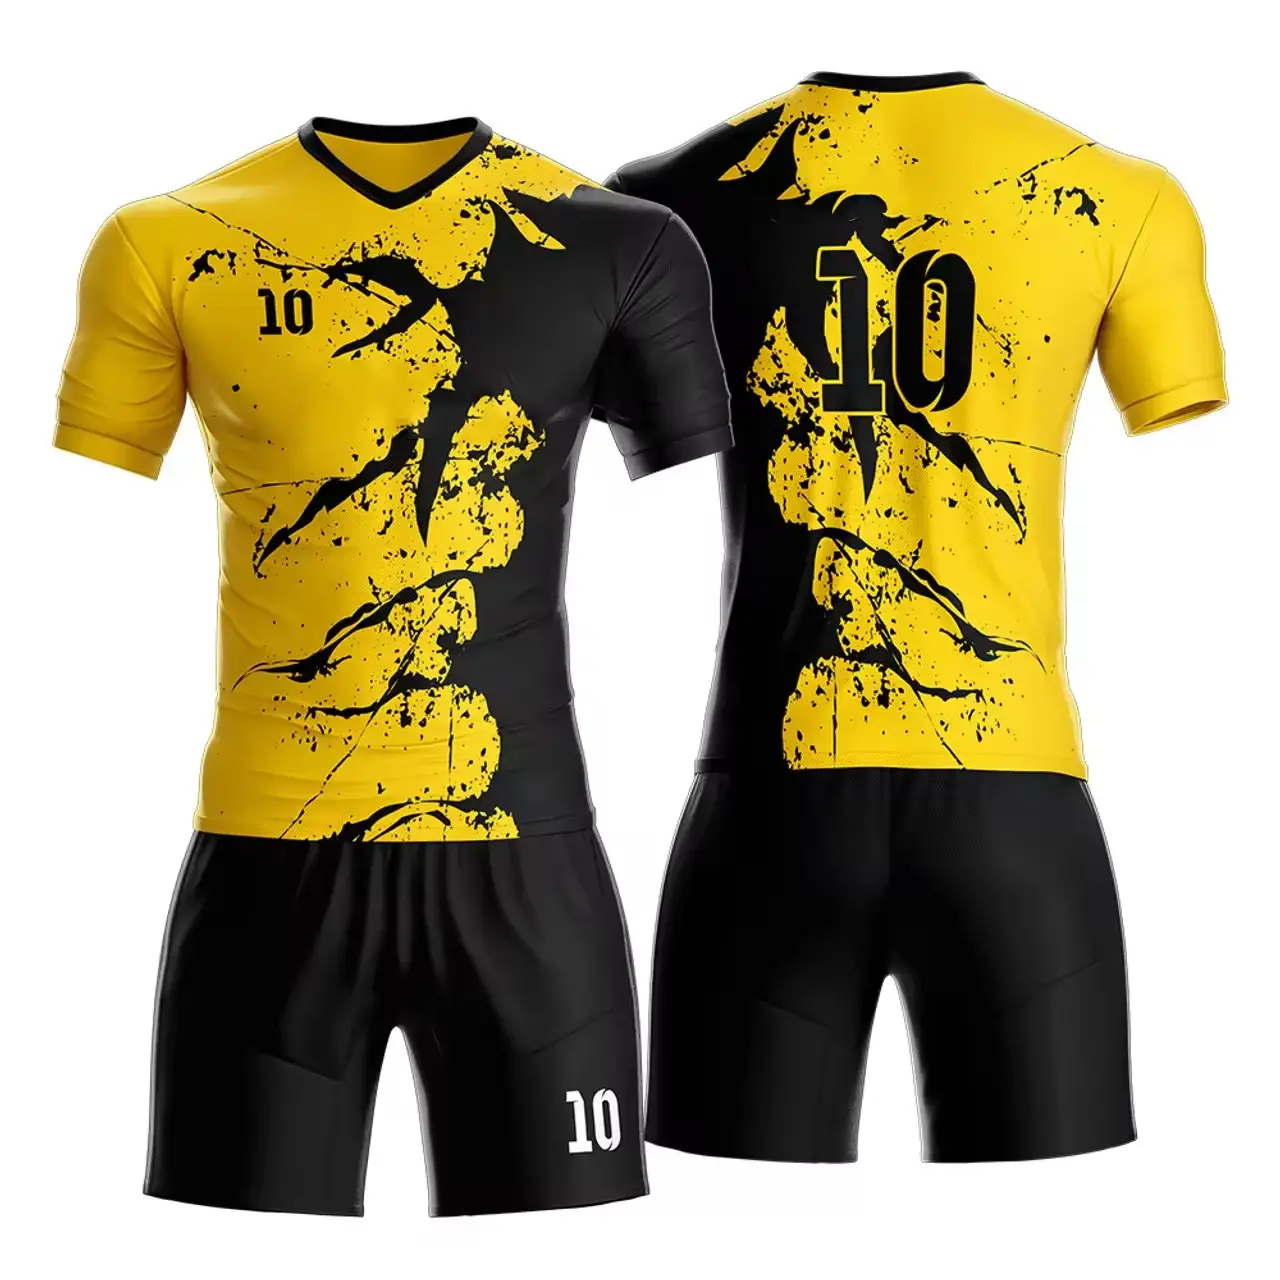 Soccer Uniform And Football Shirts With Customize Sublimation Printing Quick Dry